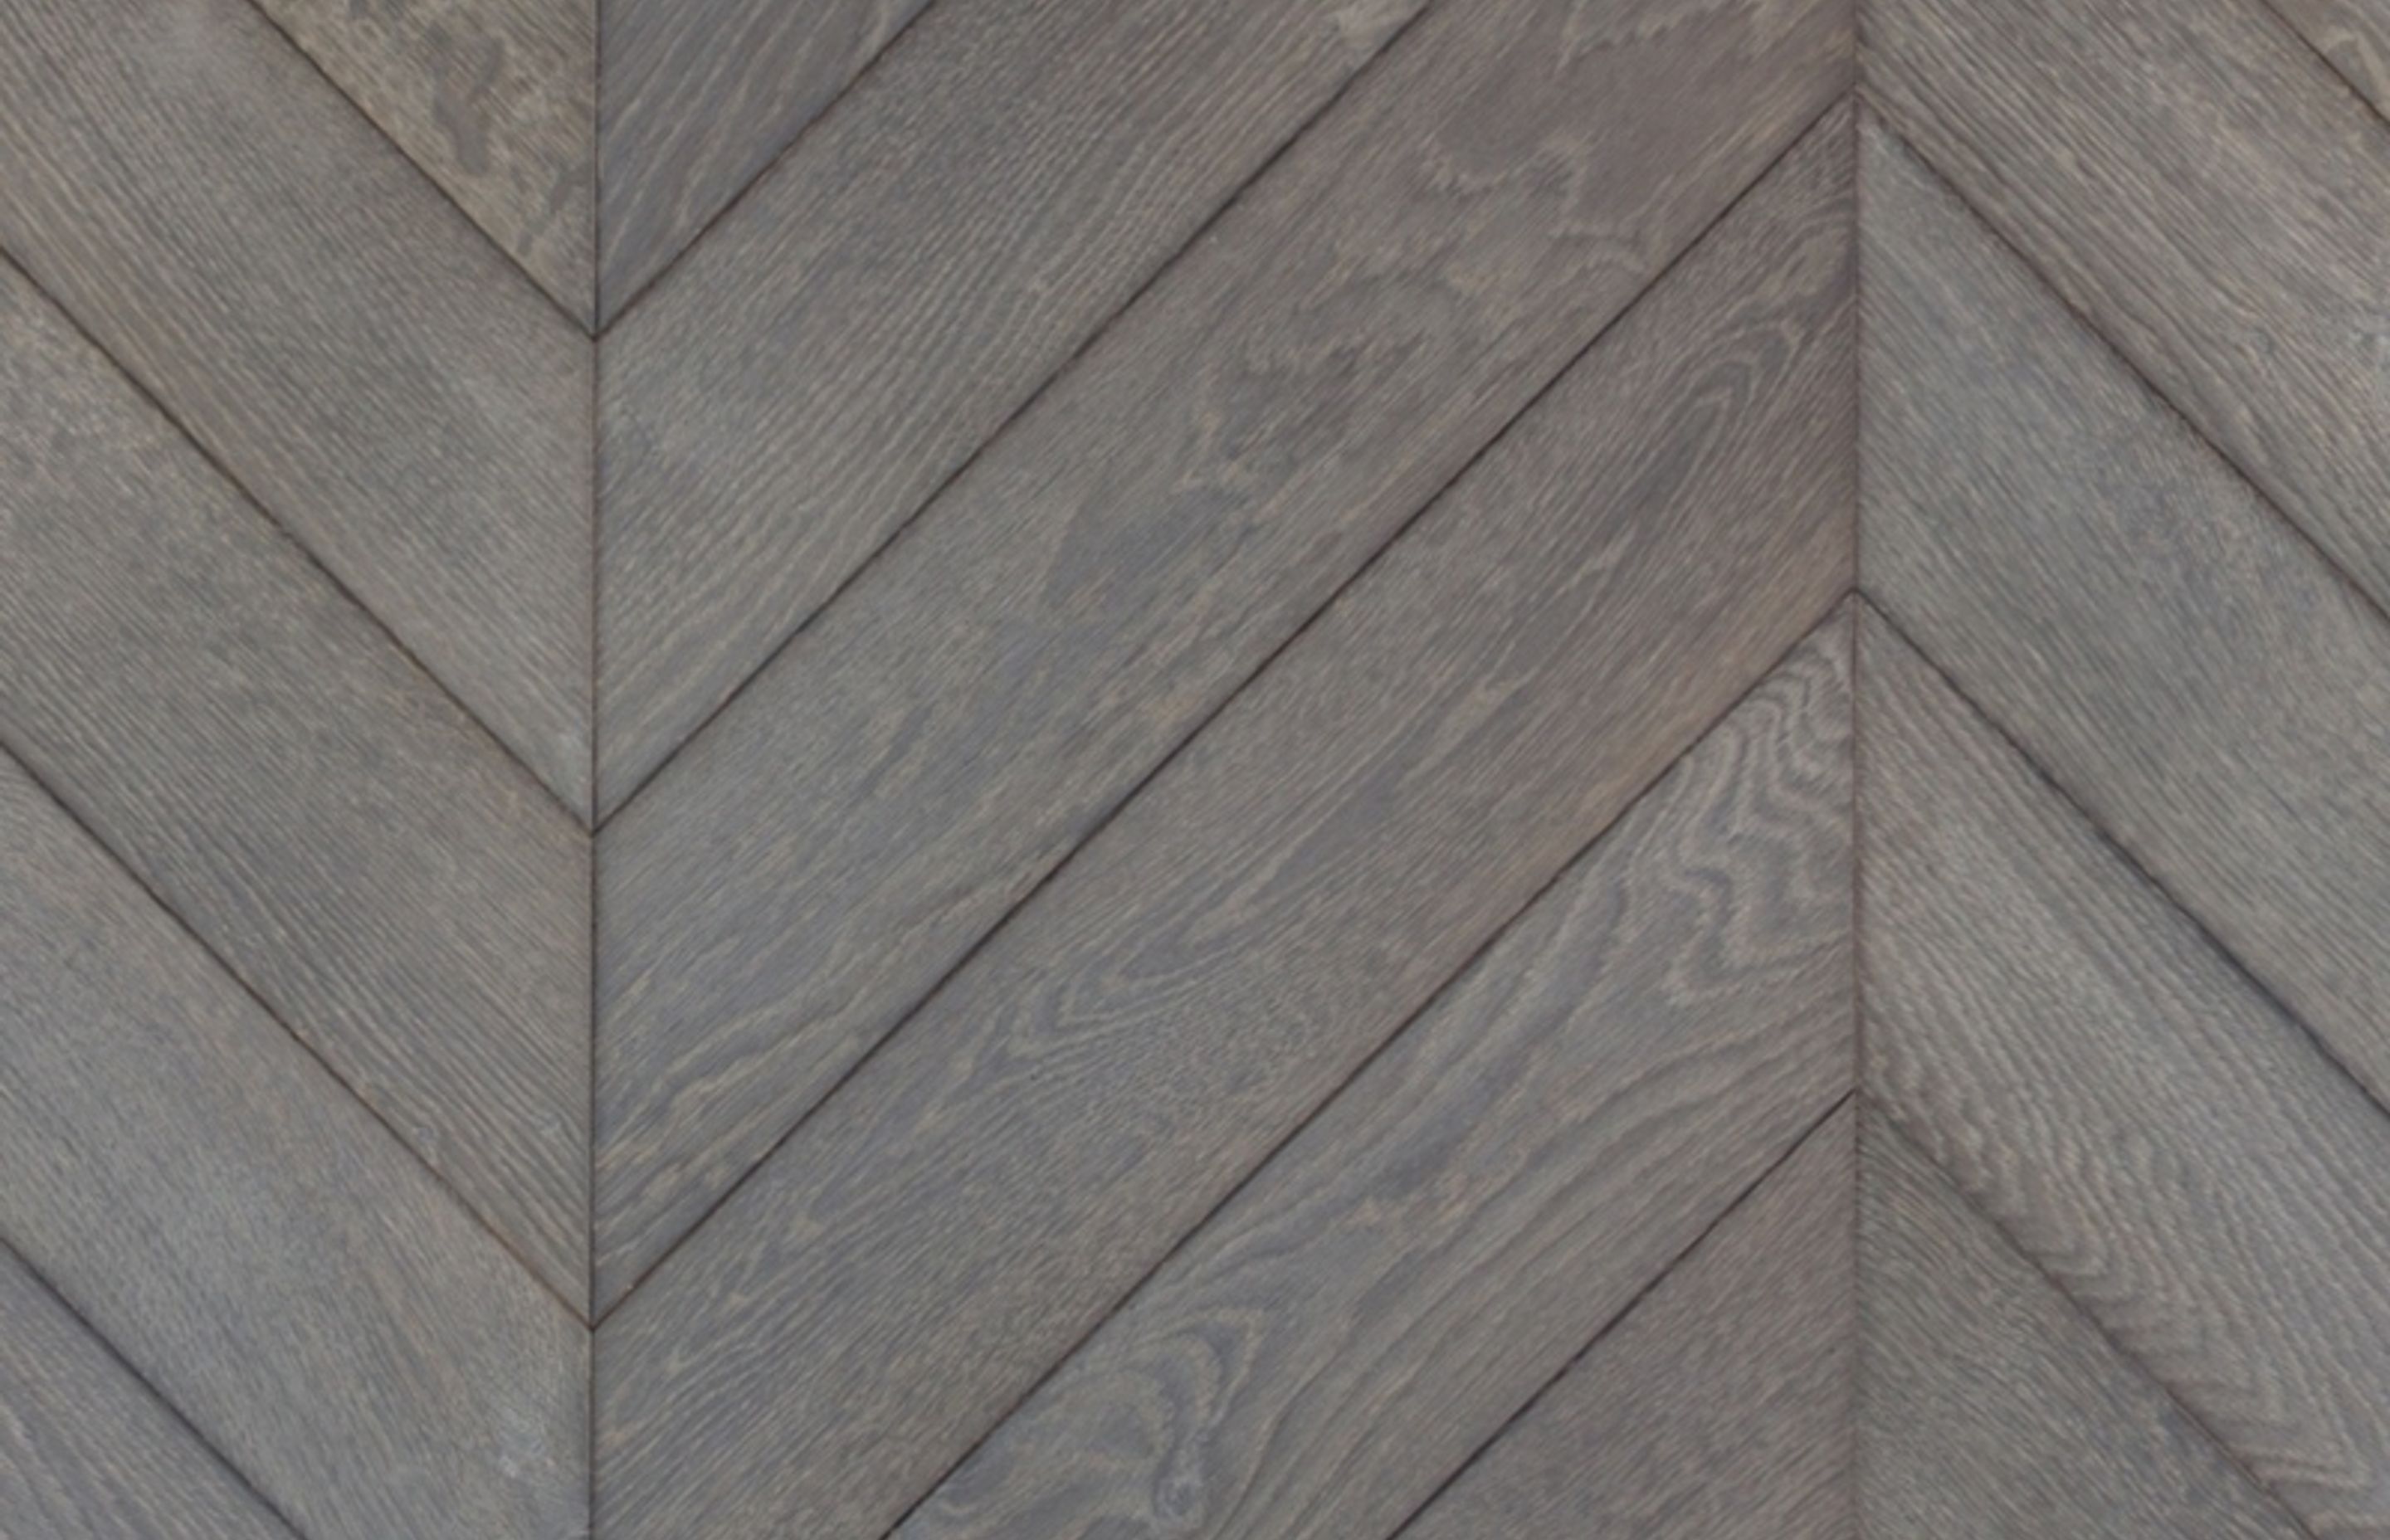 Make a feature of your flooring with a geometric pattern.